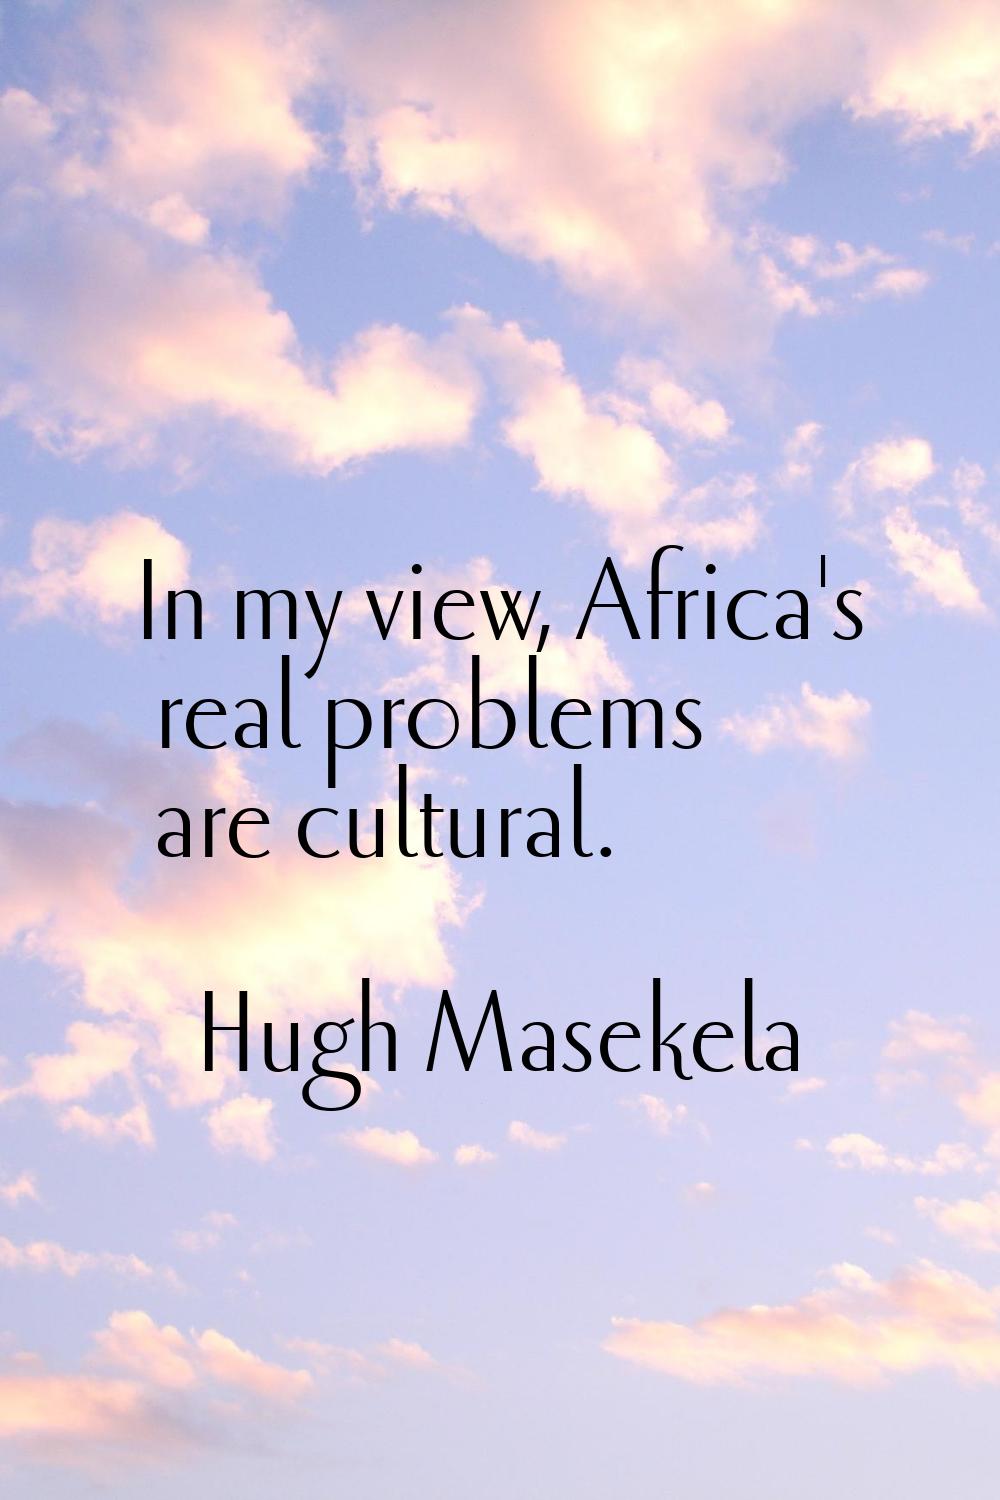 In my view, Africa's real problems are cultural.